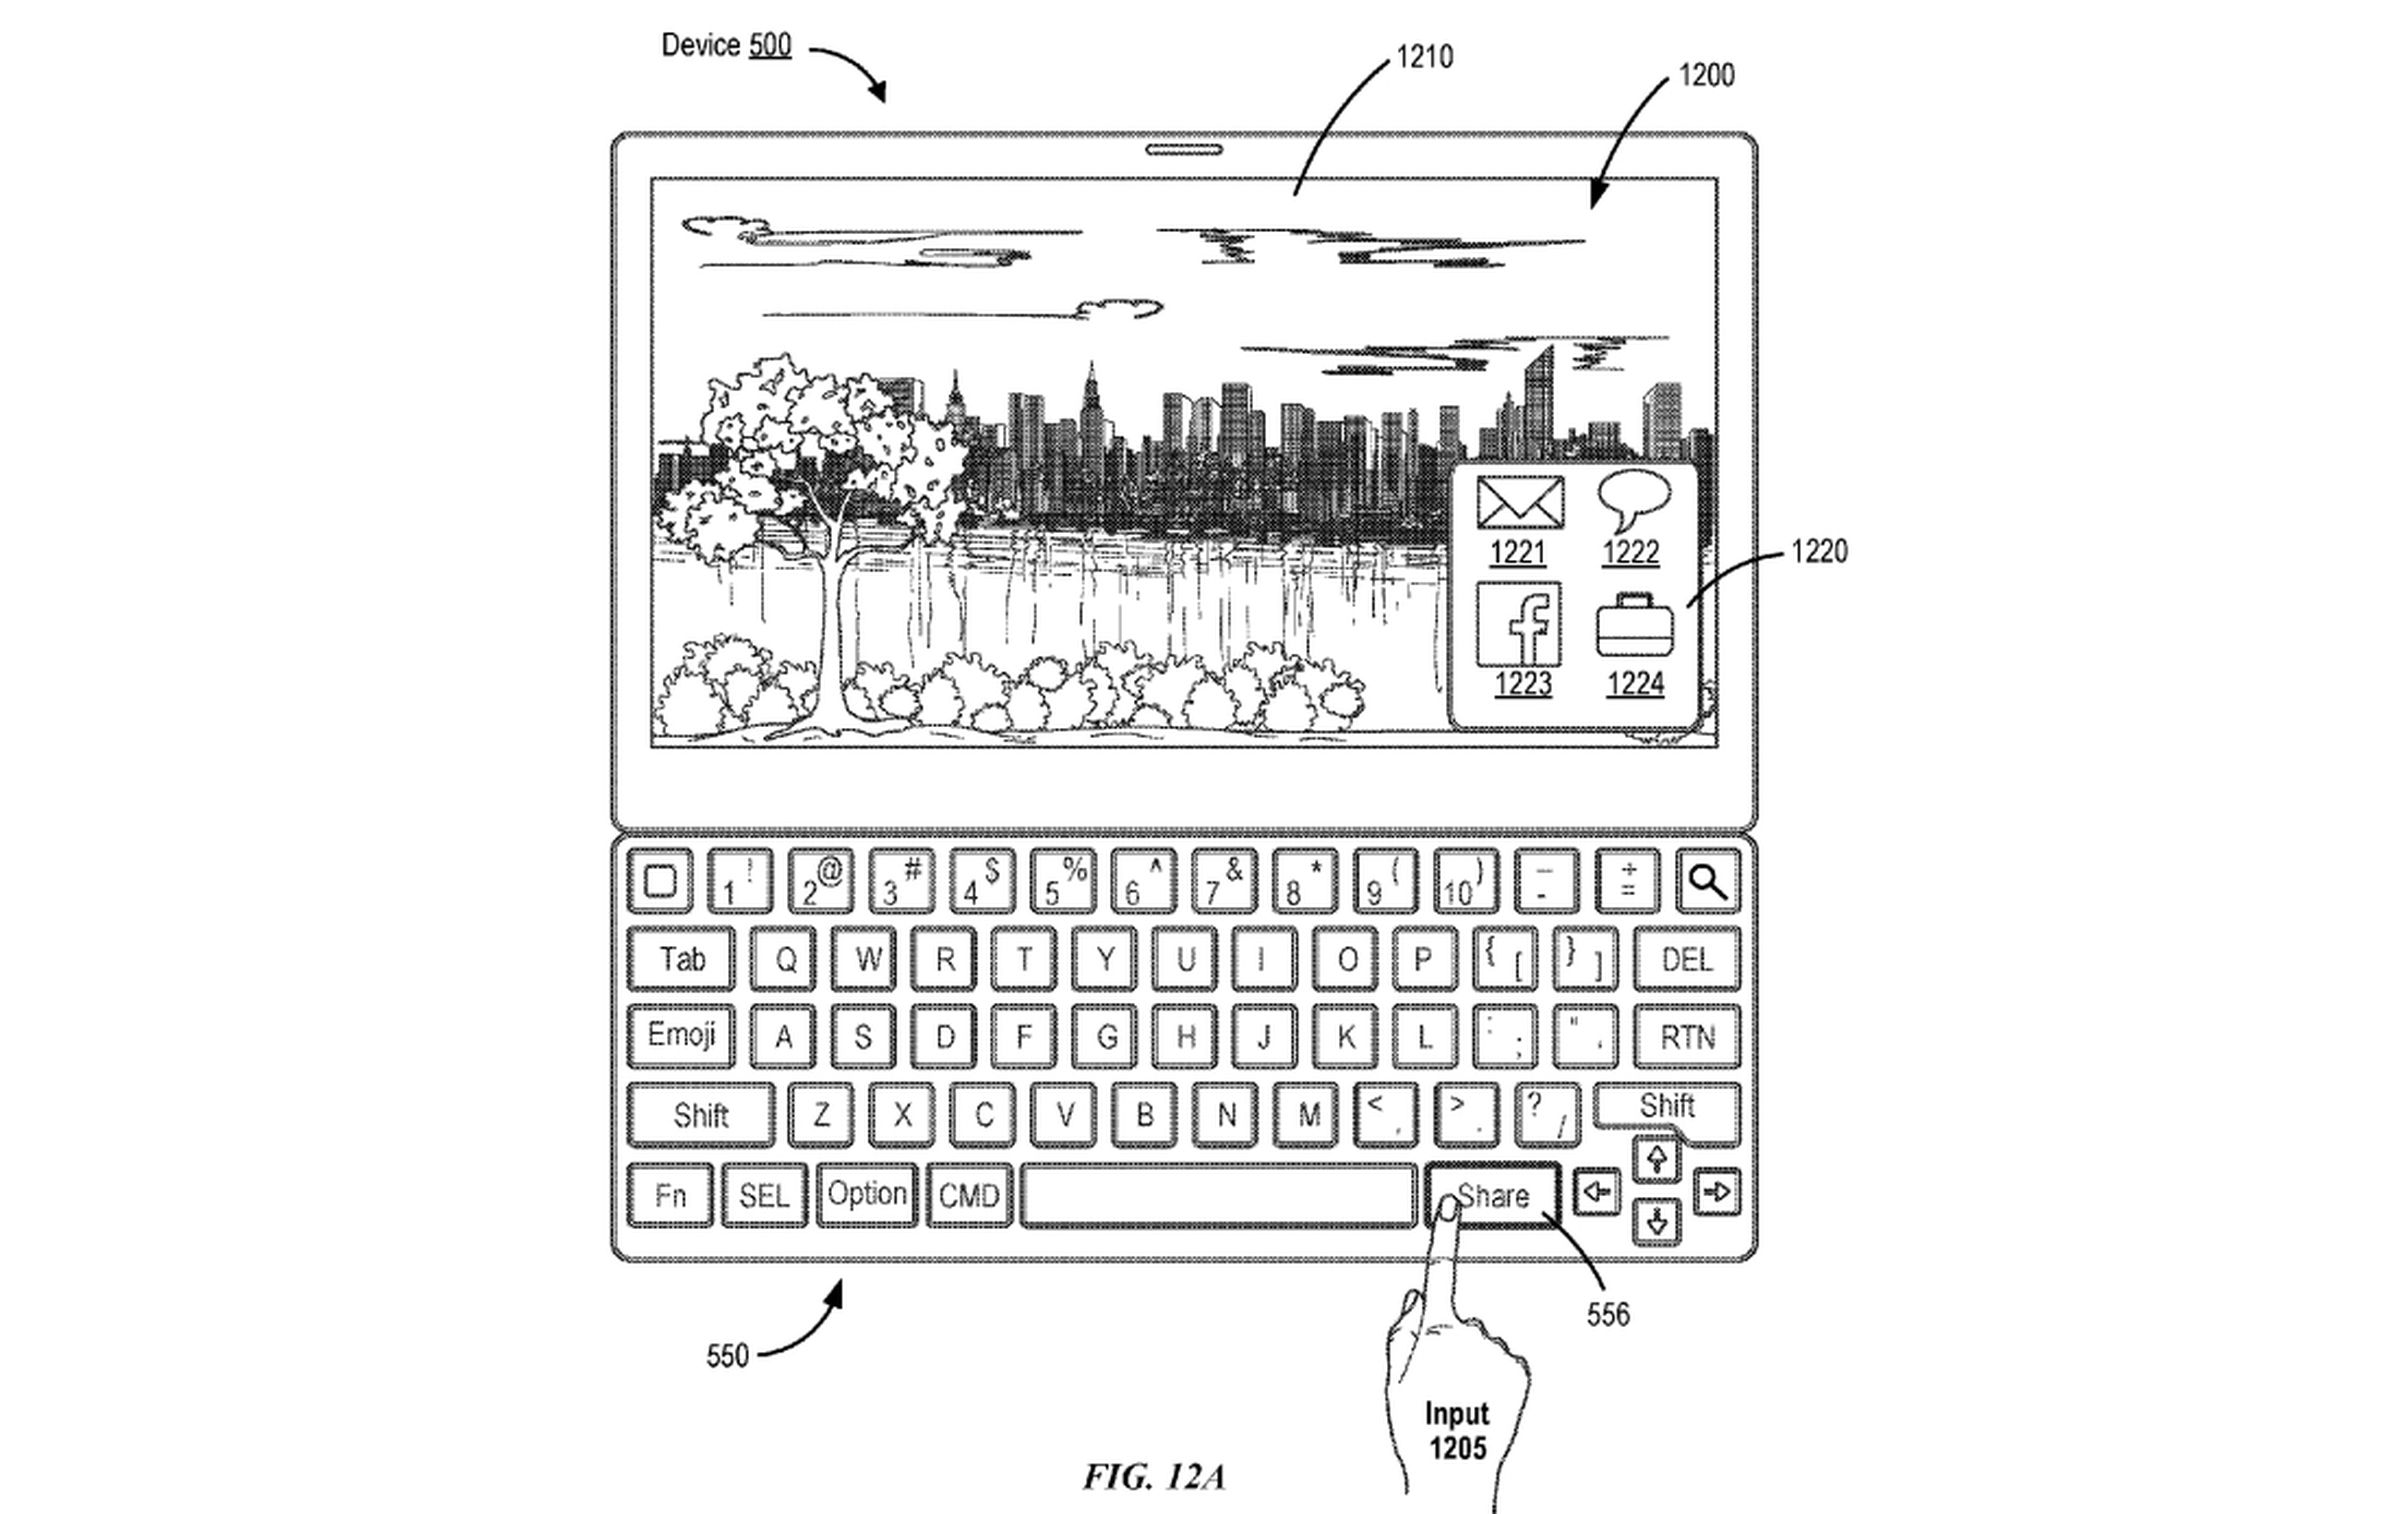 An illustration from Apple’s patent application showing a “share” key.